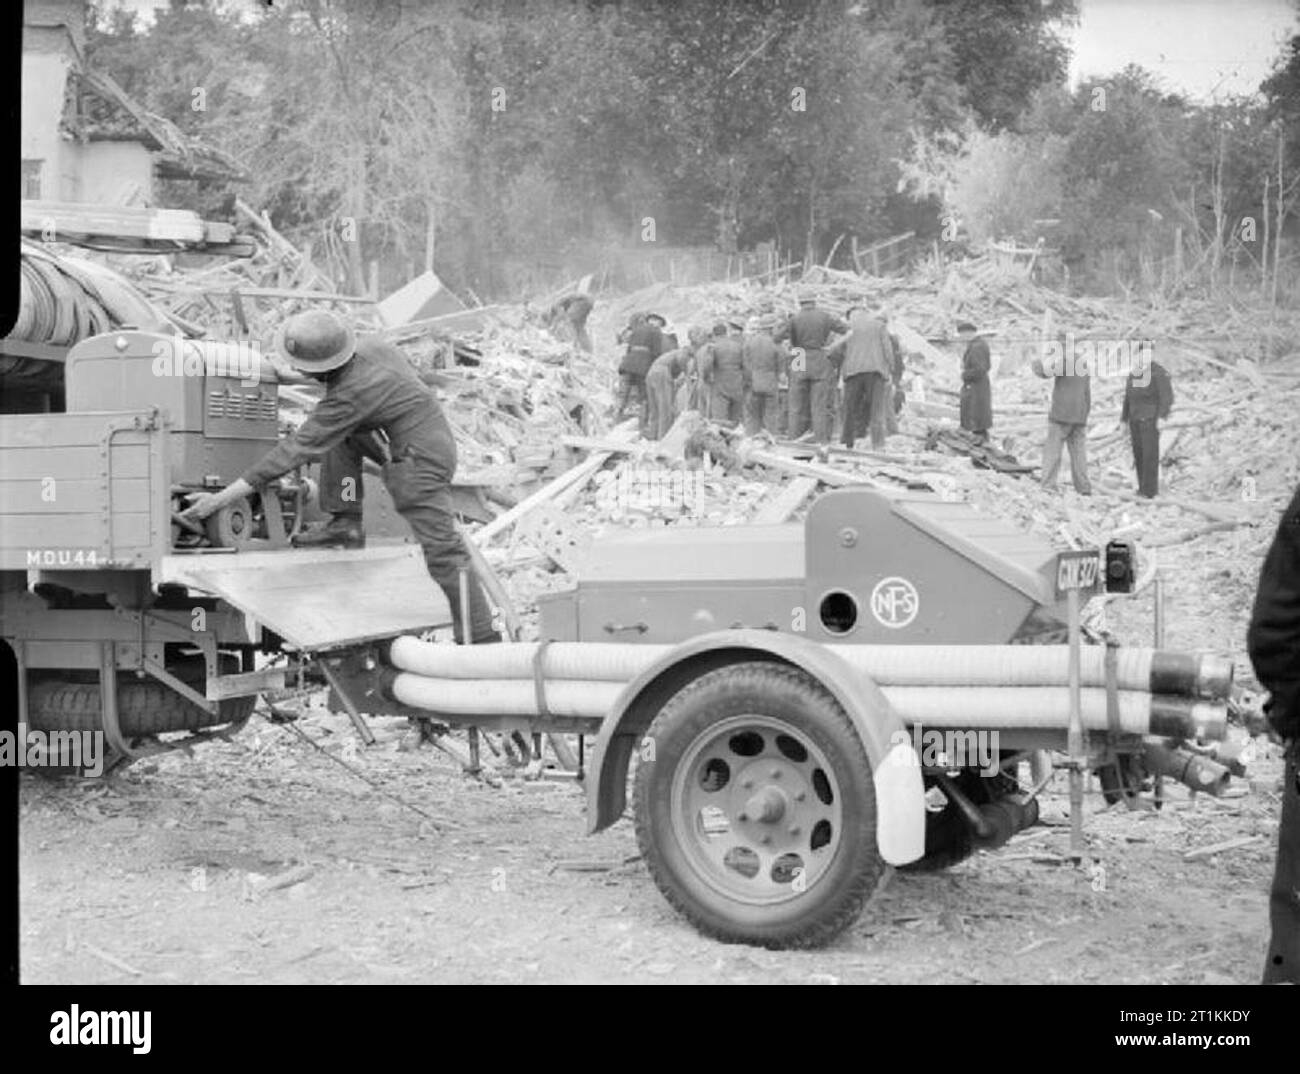 Flying Bomb- V1 Bomb Damage in London, England, UK, 1944 A fireman of the National Fire Service prepares to lift equipment from a truck following a V1 attack in the Highland Road and Lunham Road area of Upper Norwood. An NFS trailer pump can be seen in the foreground, standing ready should it be required. In the background, a group of Civil Defence rescue workers search for survivors under a huge pile of rubble and timbers. Stock Photo